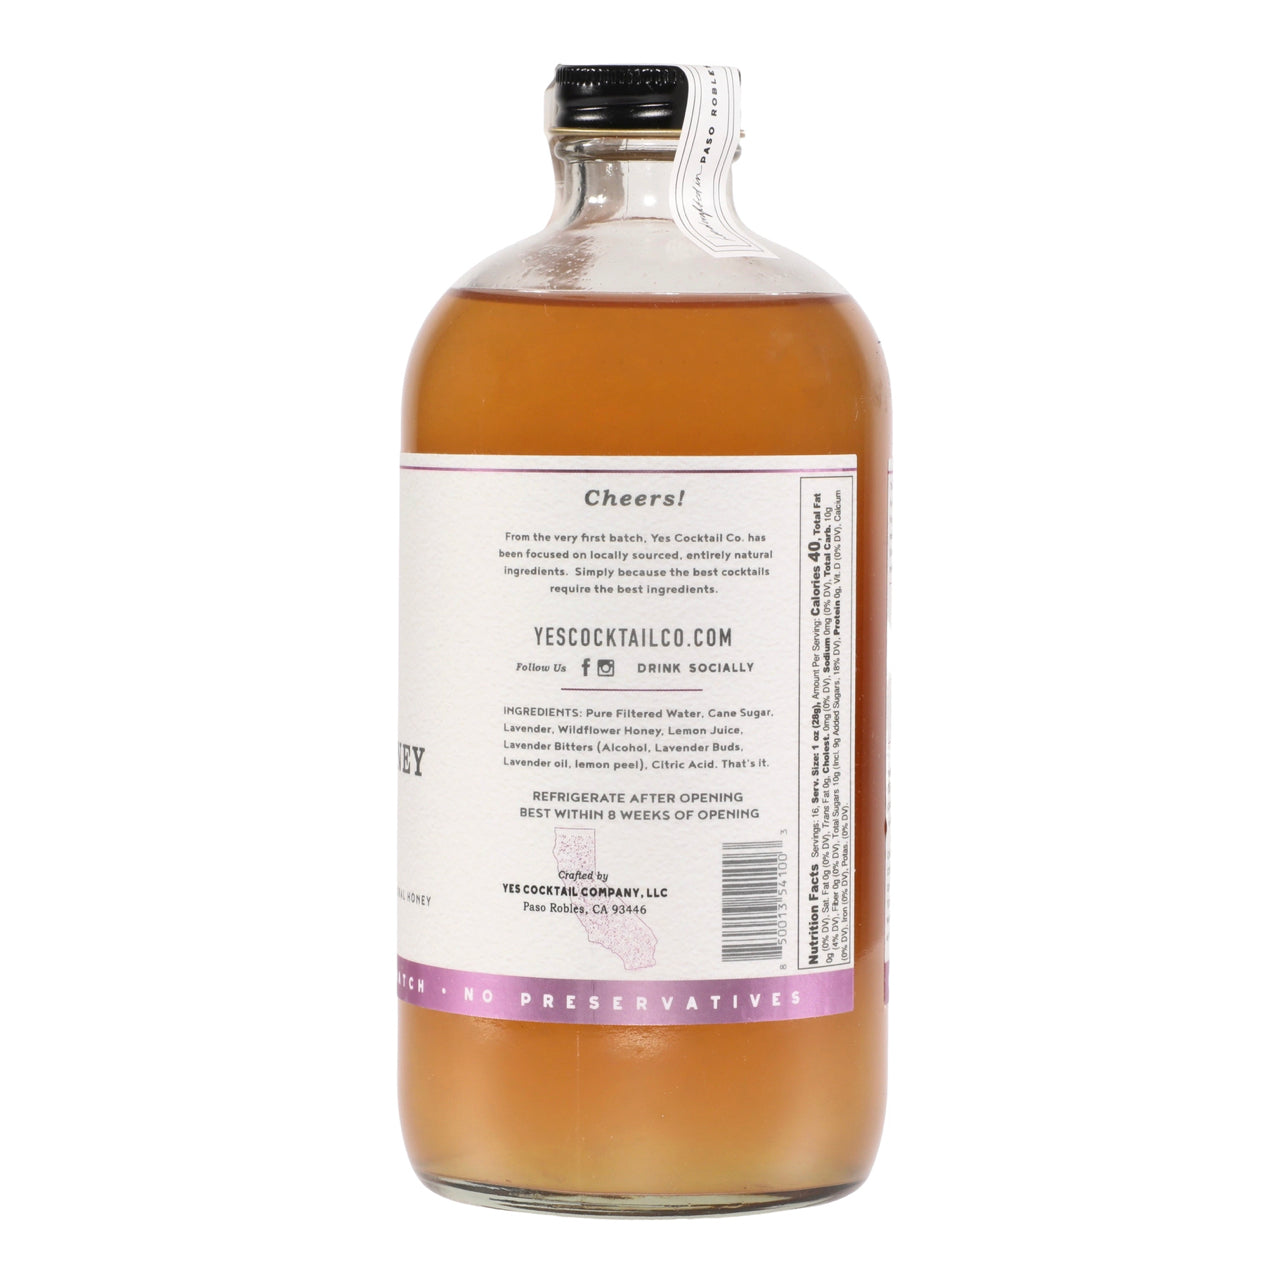 16 oz bottle of handcrafted Lavendar and Honey Cocktail Mixer made by Yes Cocktail Co with label displaying nutritional information